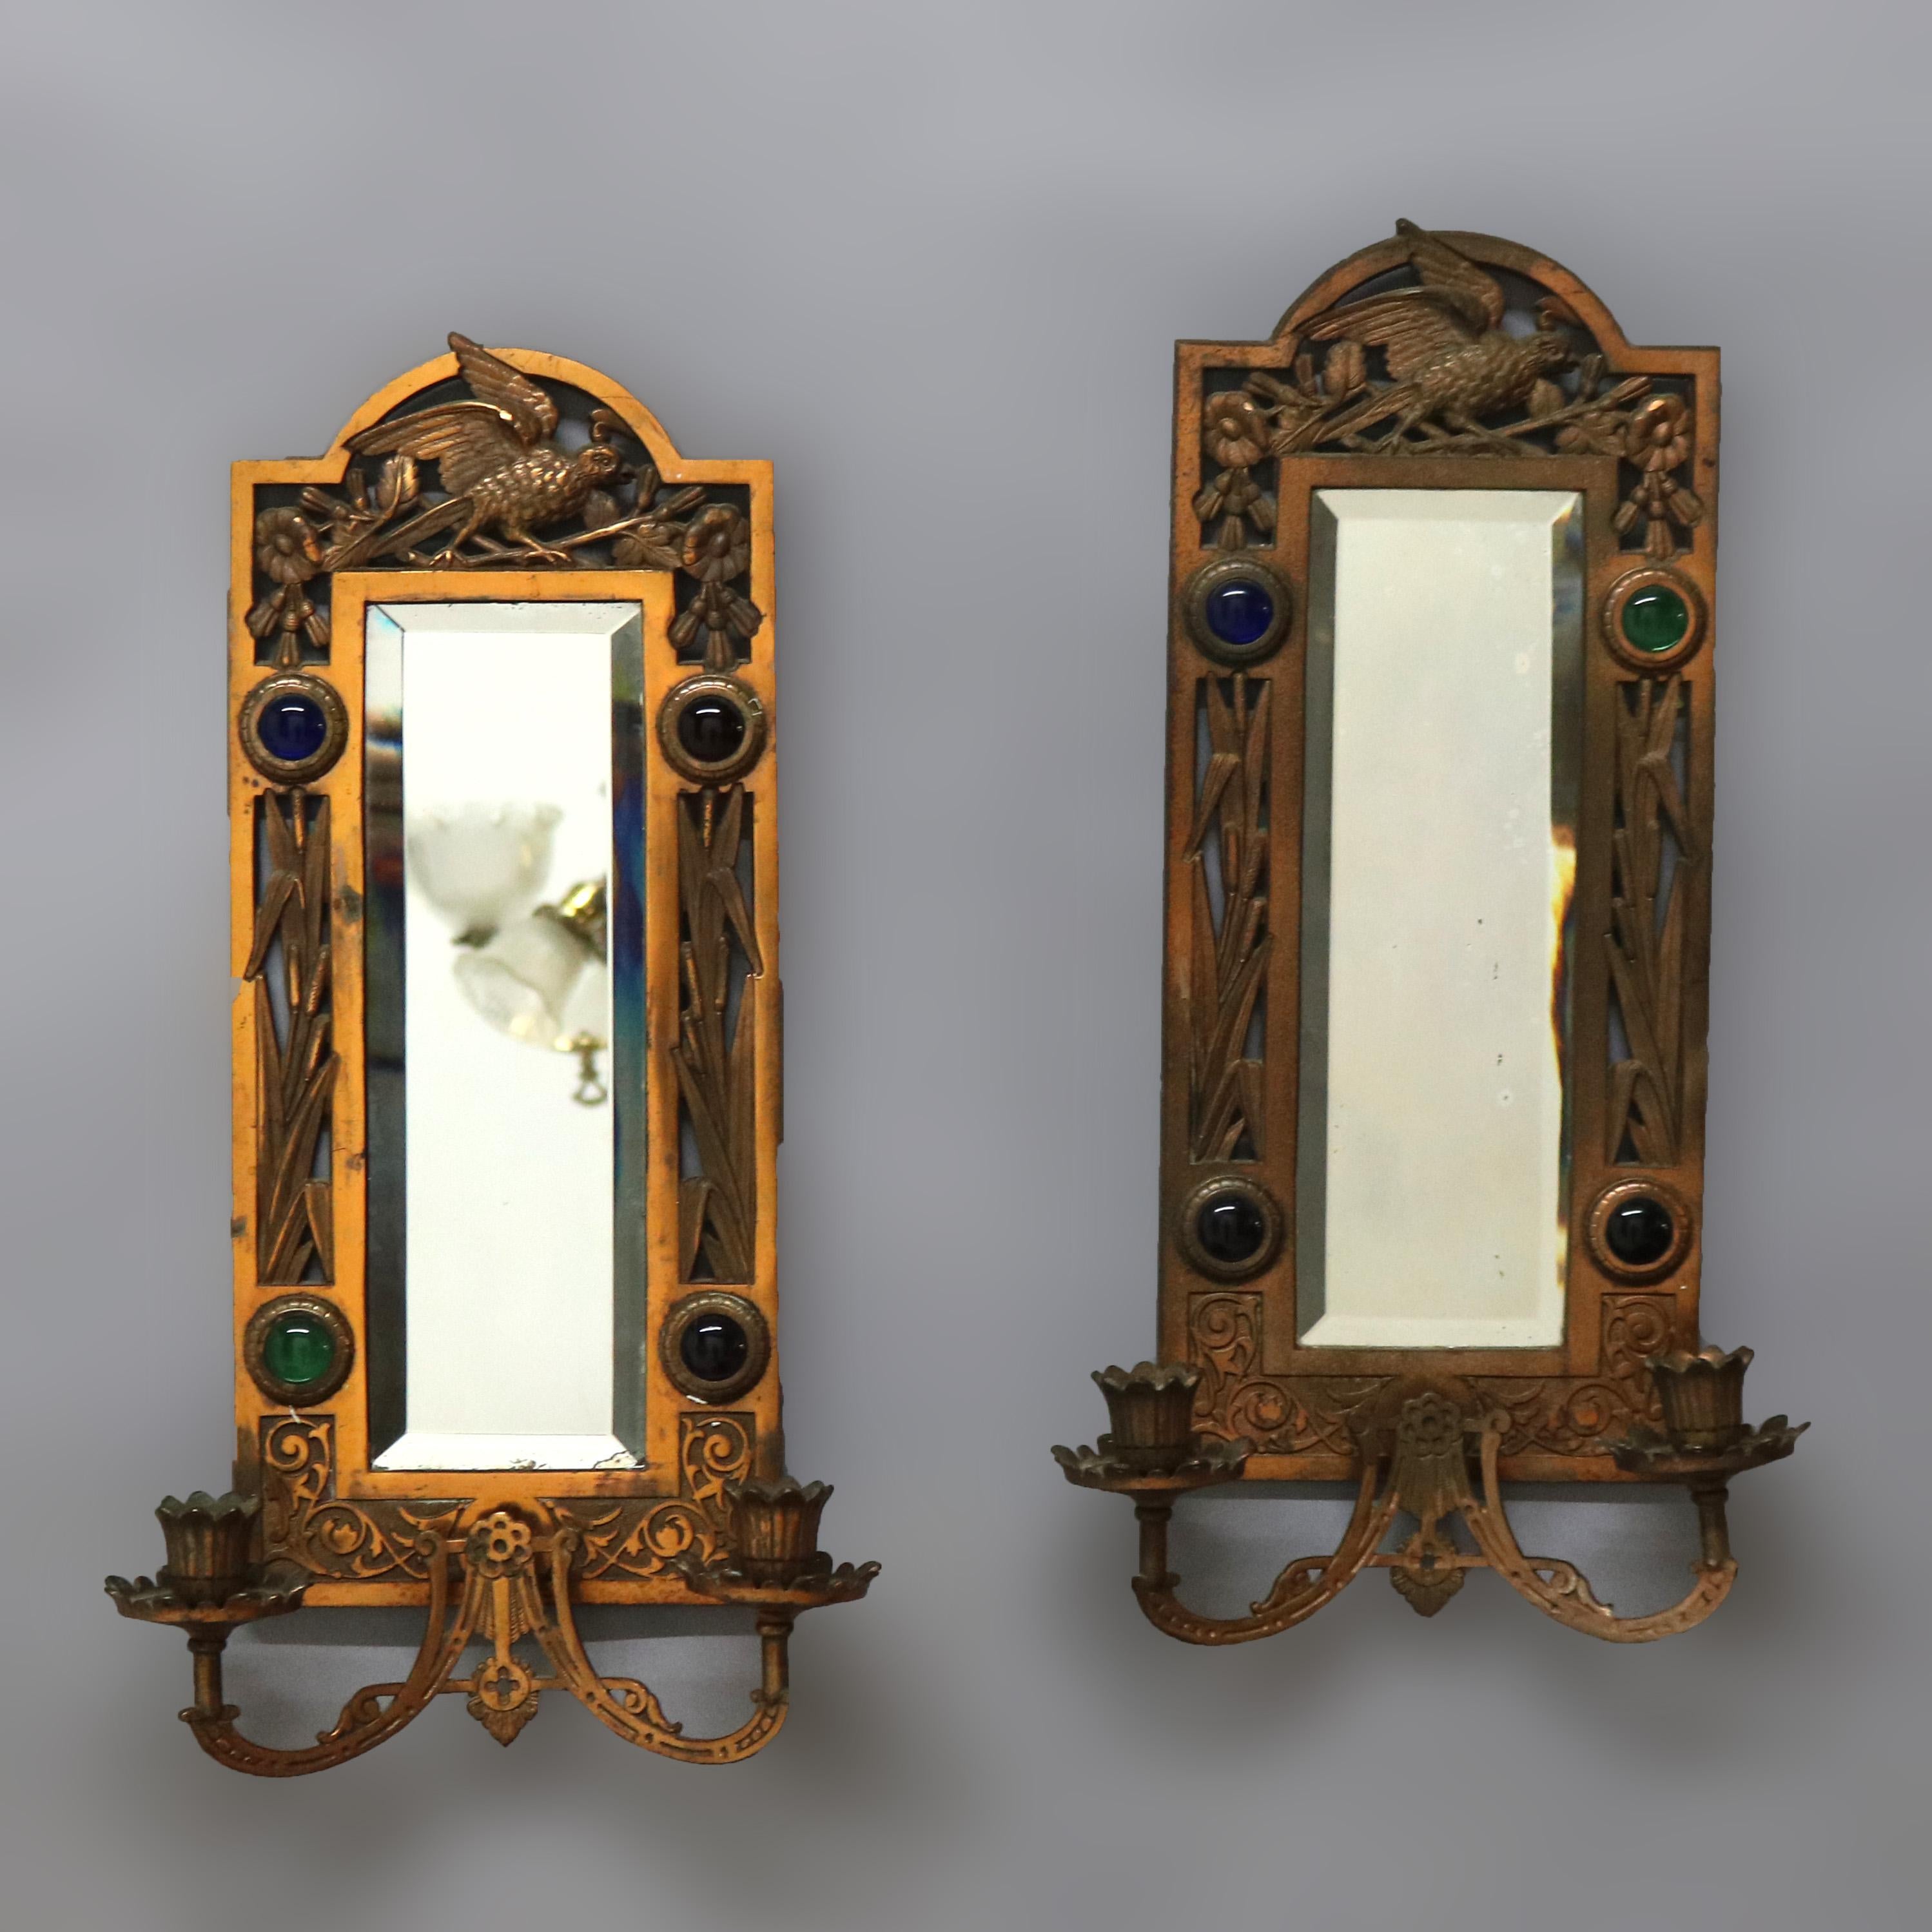 An antique pair of Aesthetic Movement mirrored wall sconces offer bronzed cast metal frames with a bird form pediments, marsh elements and double arms terminating in candle sockets; jeweled highlights throughout; c1880

Measures - 20